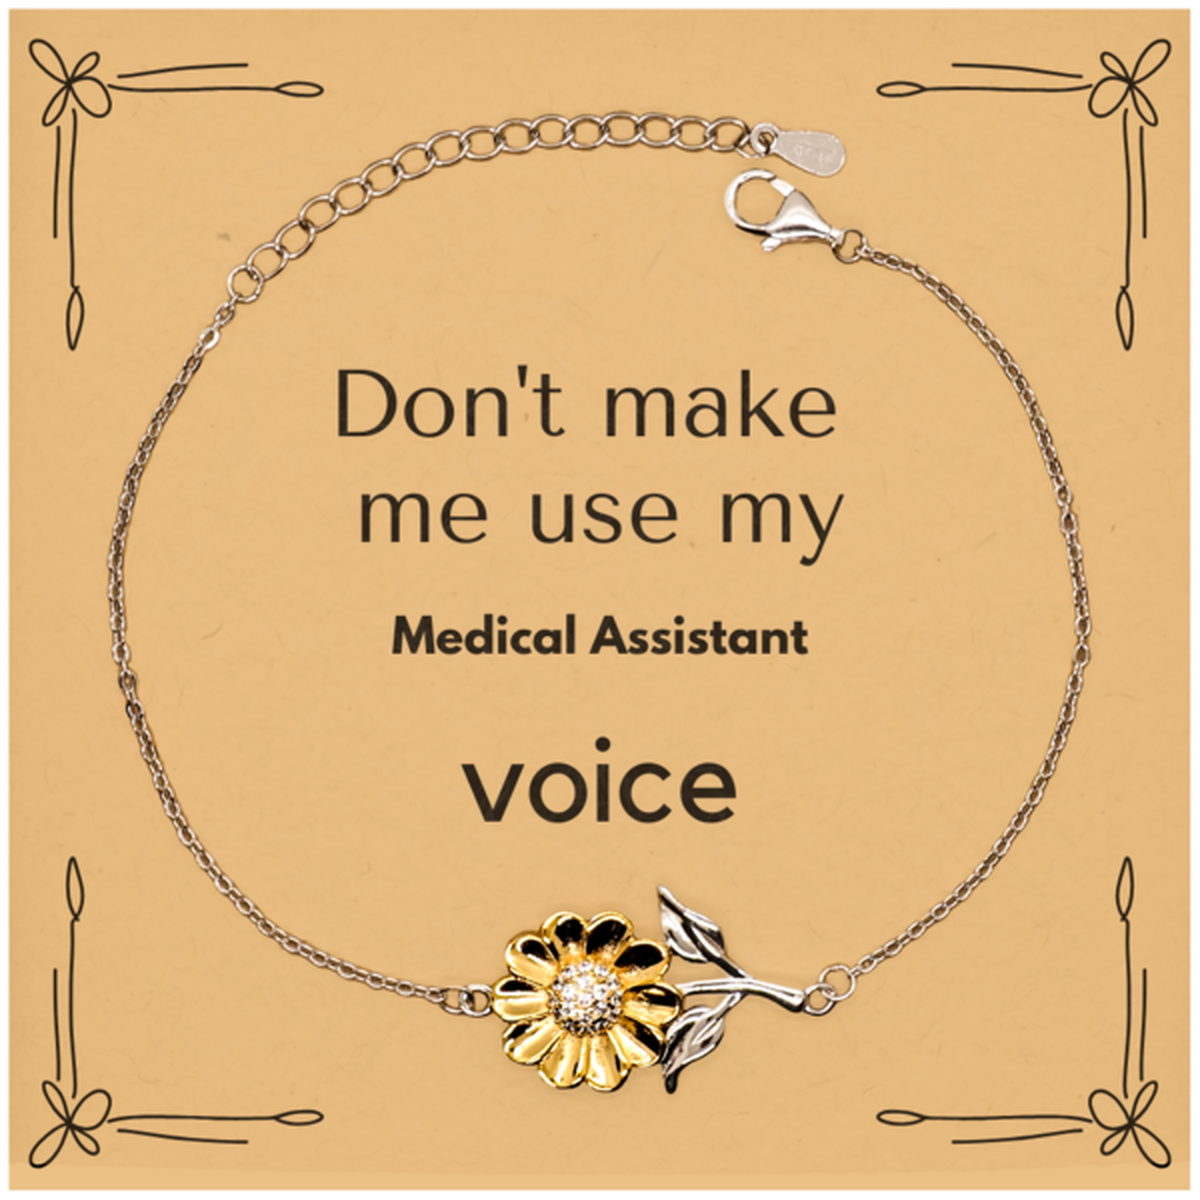 Don't make me use my Medical Assistant voice, Sarcasm Medical Assistant Card Gifts, Christmas Medical Assistant Sunflower Bracelet Birthday Unique Gifts For Medical Assistant Coworkers, Men, Women, Colleague, Friends